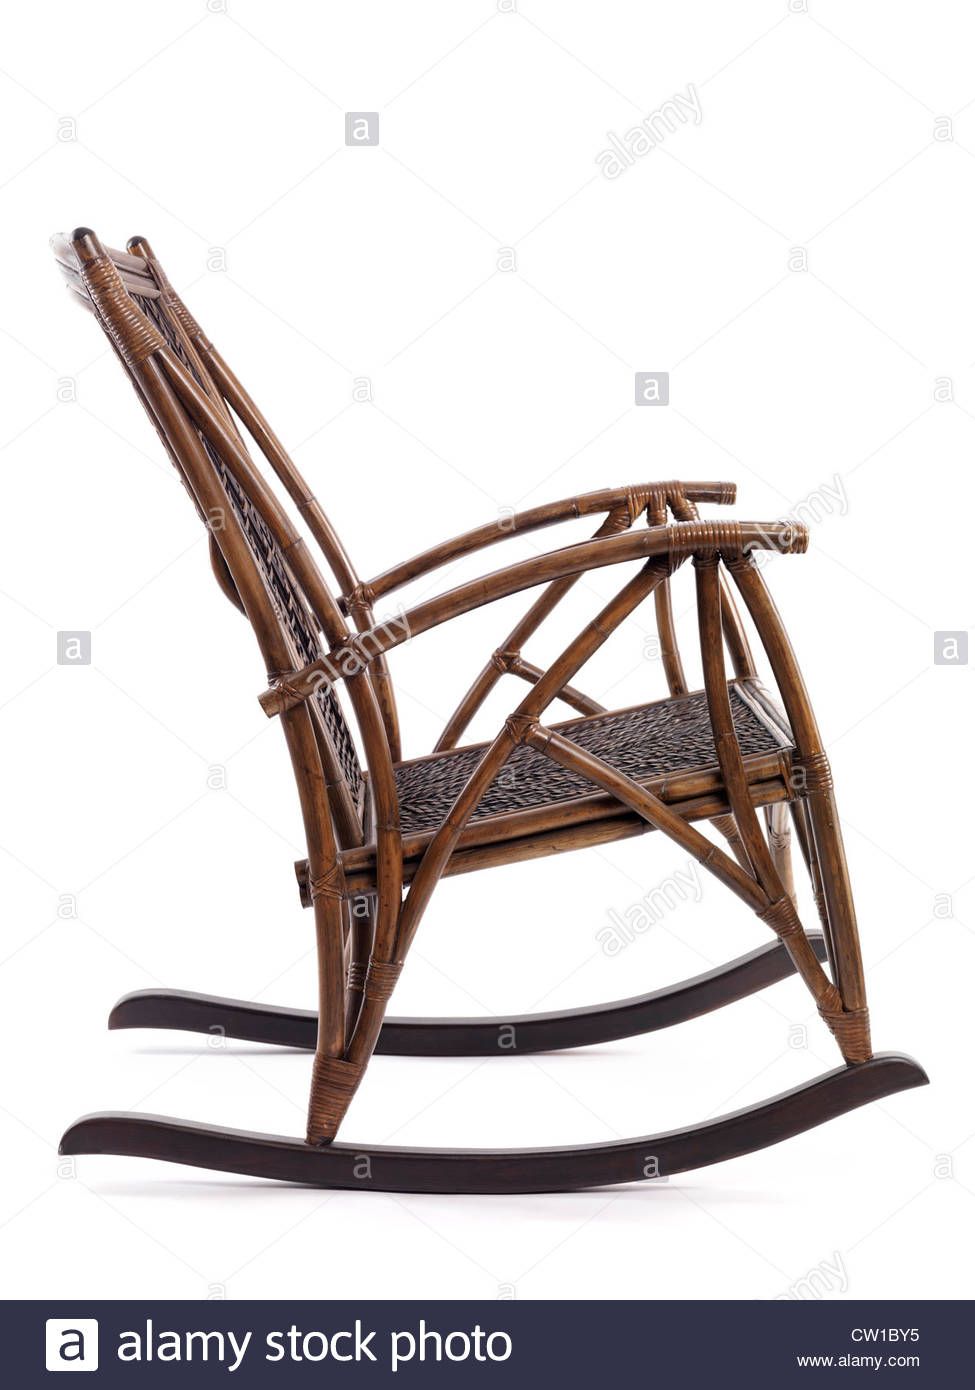 Antique Wooden Rocking Chair Side View Isolated On White Pertaining To Antique White Wooden Rocking Chairs (View 14 of 20)